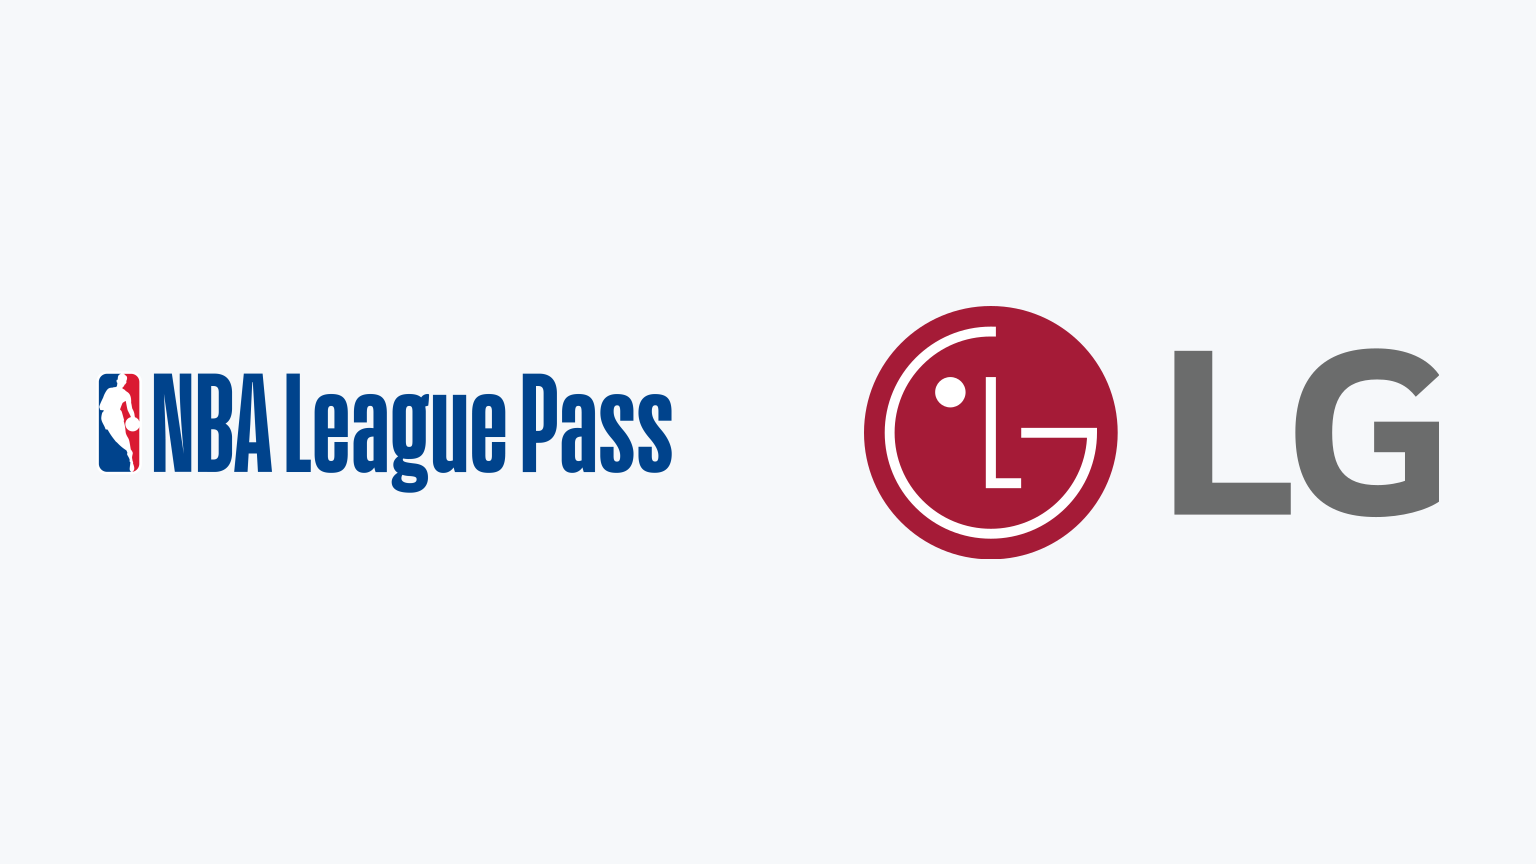 How To Install Nba League Pass On LG Smart TV